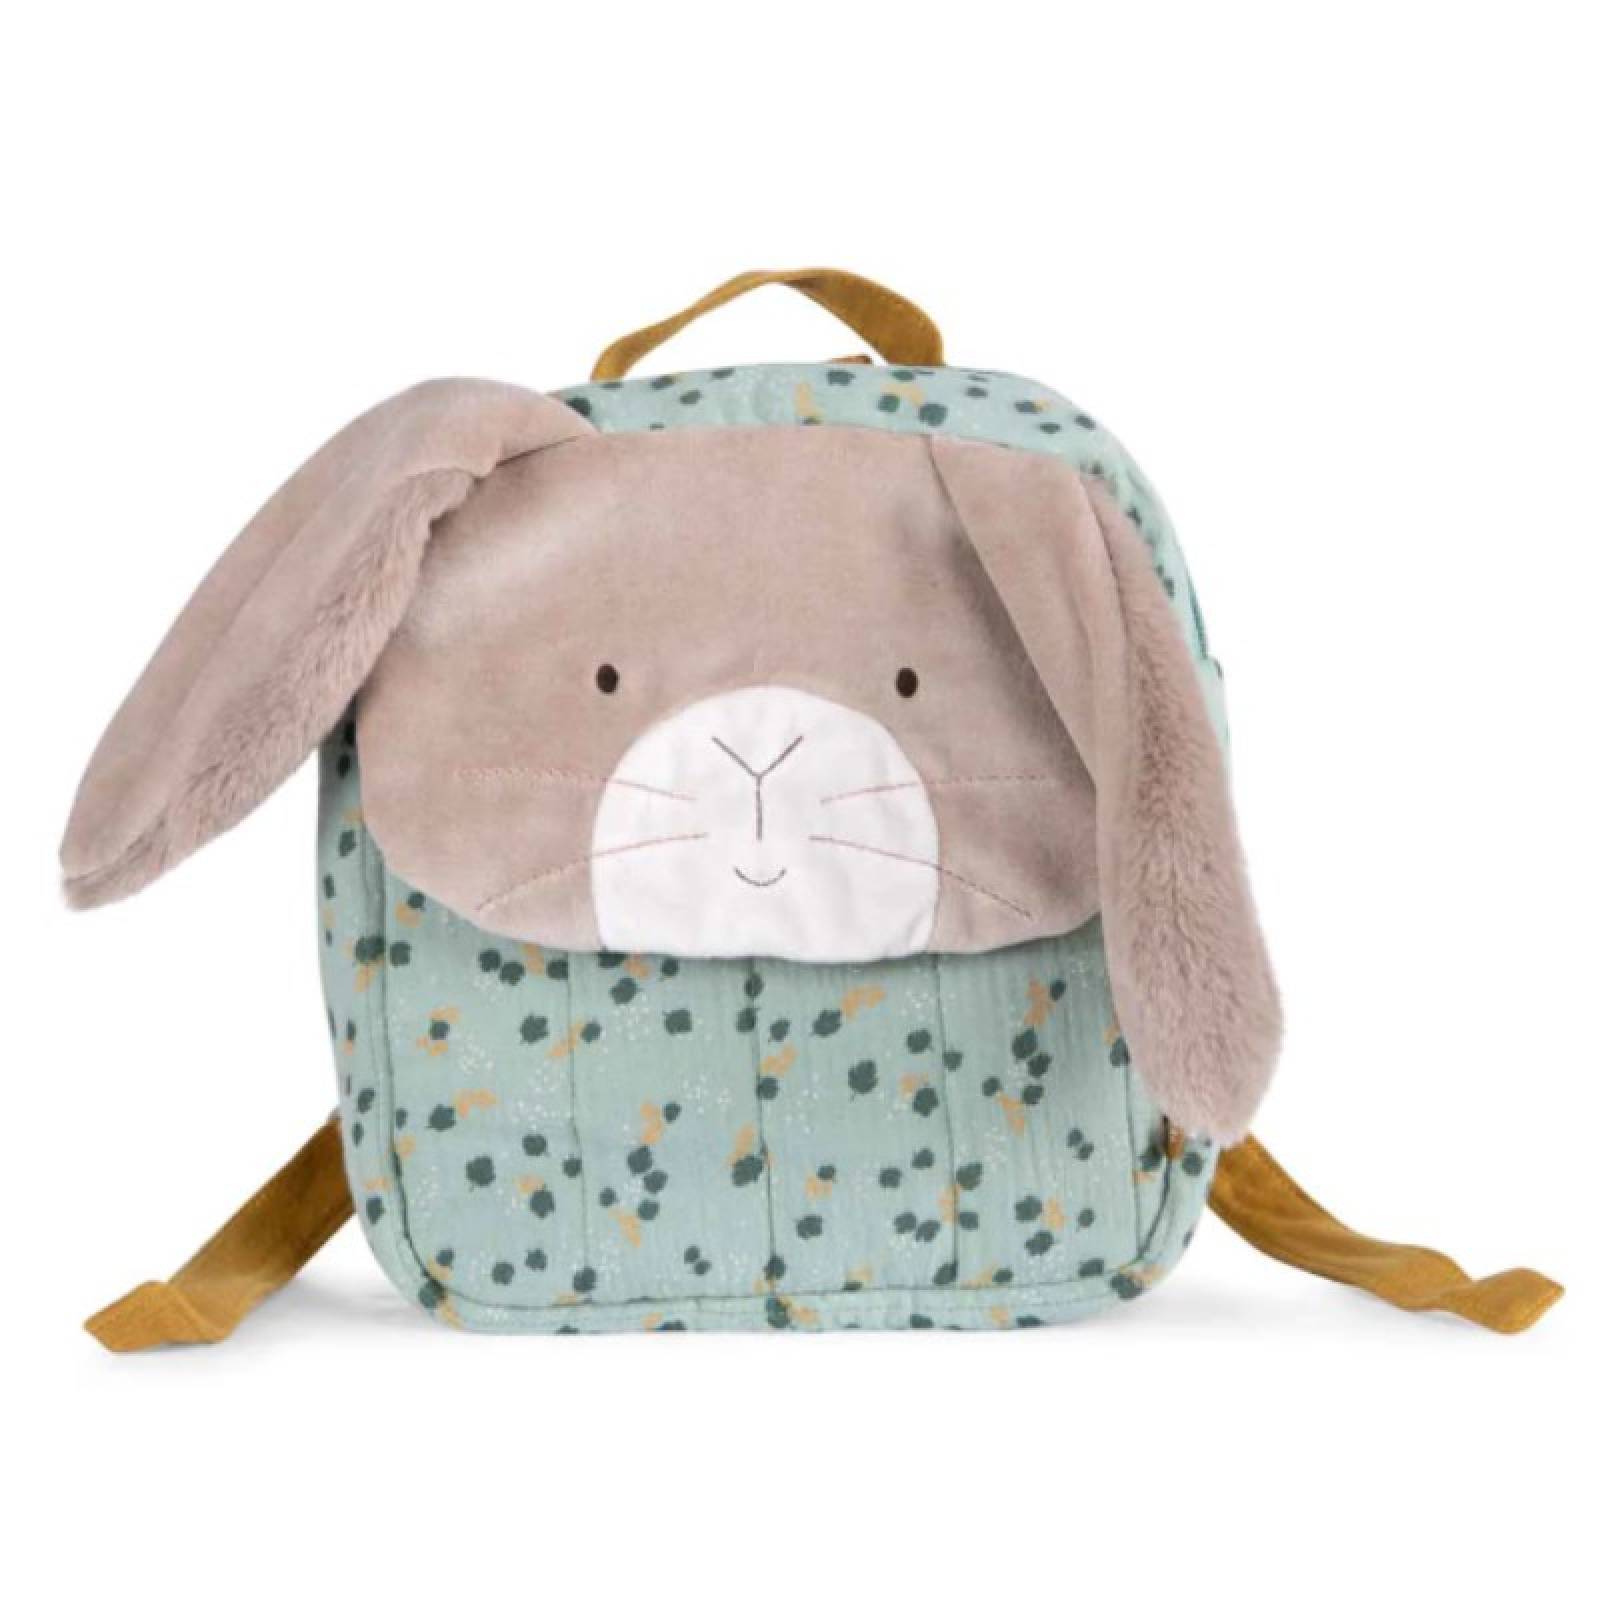 Children's Sage Rabbit Backpack By Moulin Roty 3+